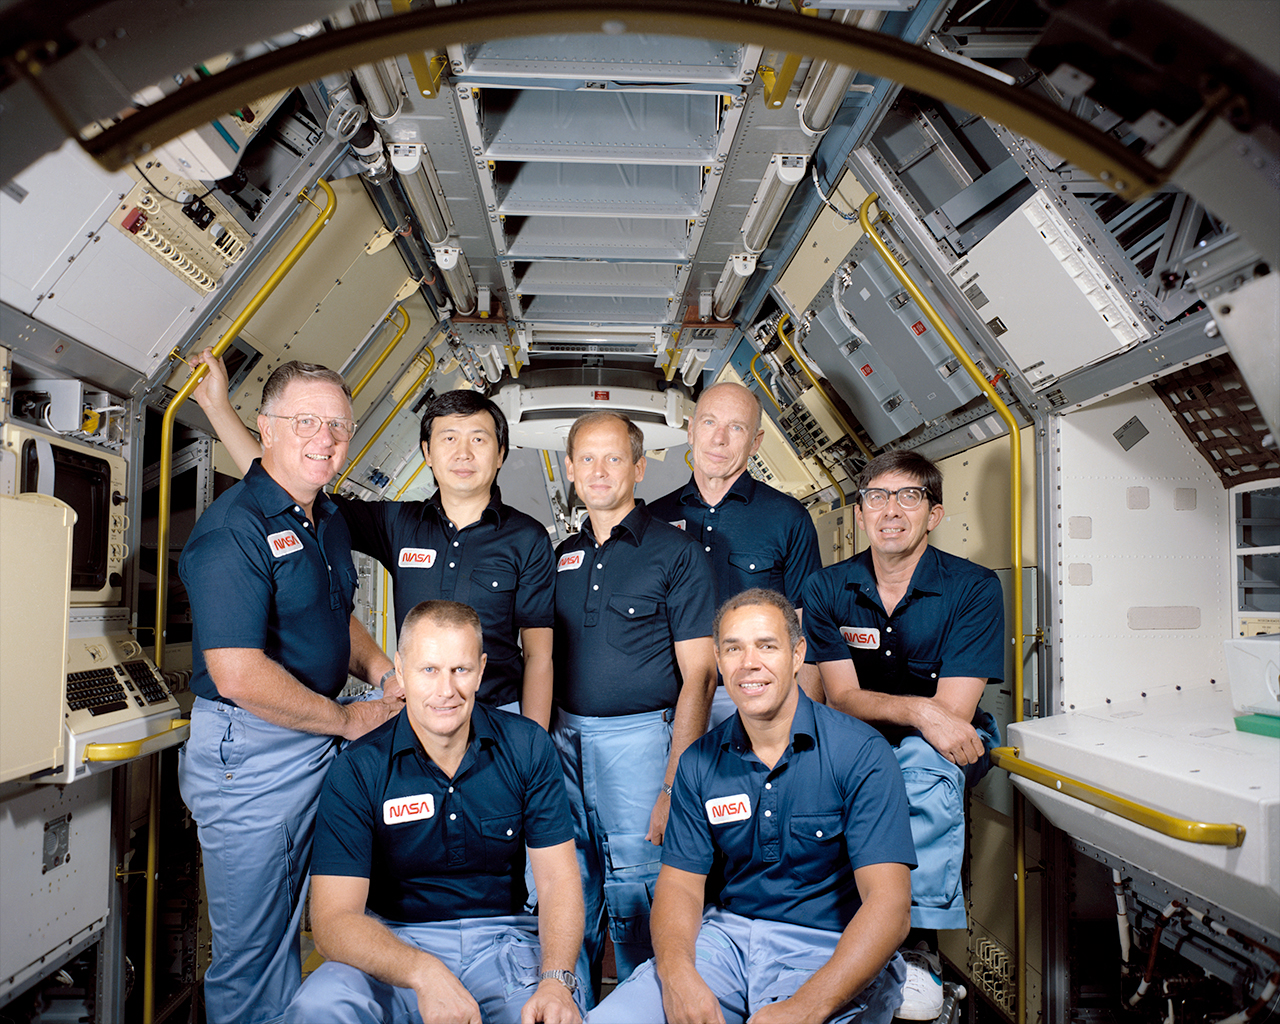 Don Lind (at left) with his six space shuttle Challenger STS-51B crewmates Bob Overmyer, Taylor Wang, Norm Thagard, Bill Thornton, Fred Gregory and Lodewijk van den Berg.